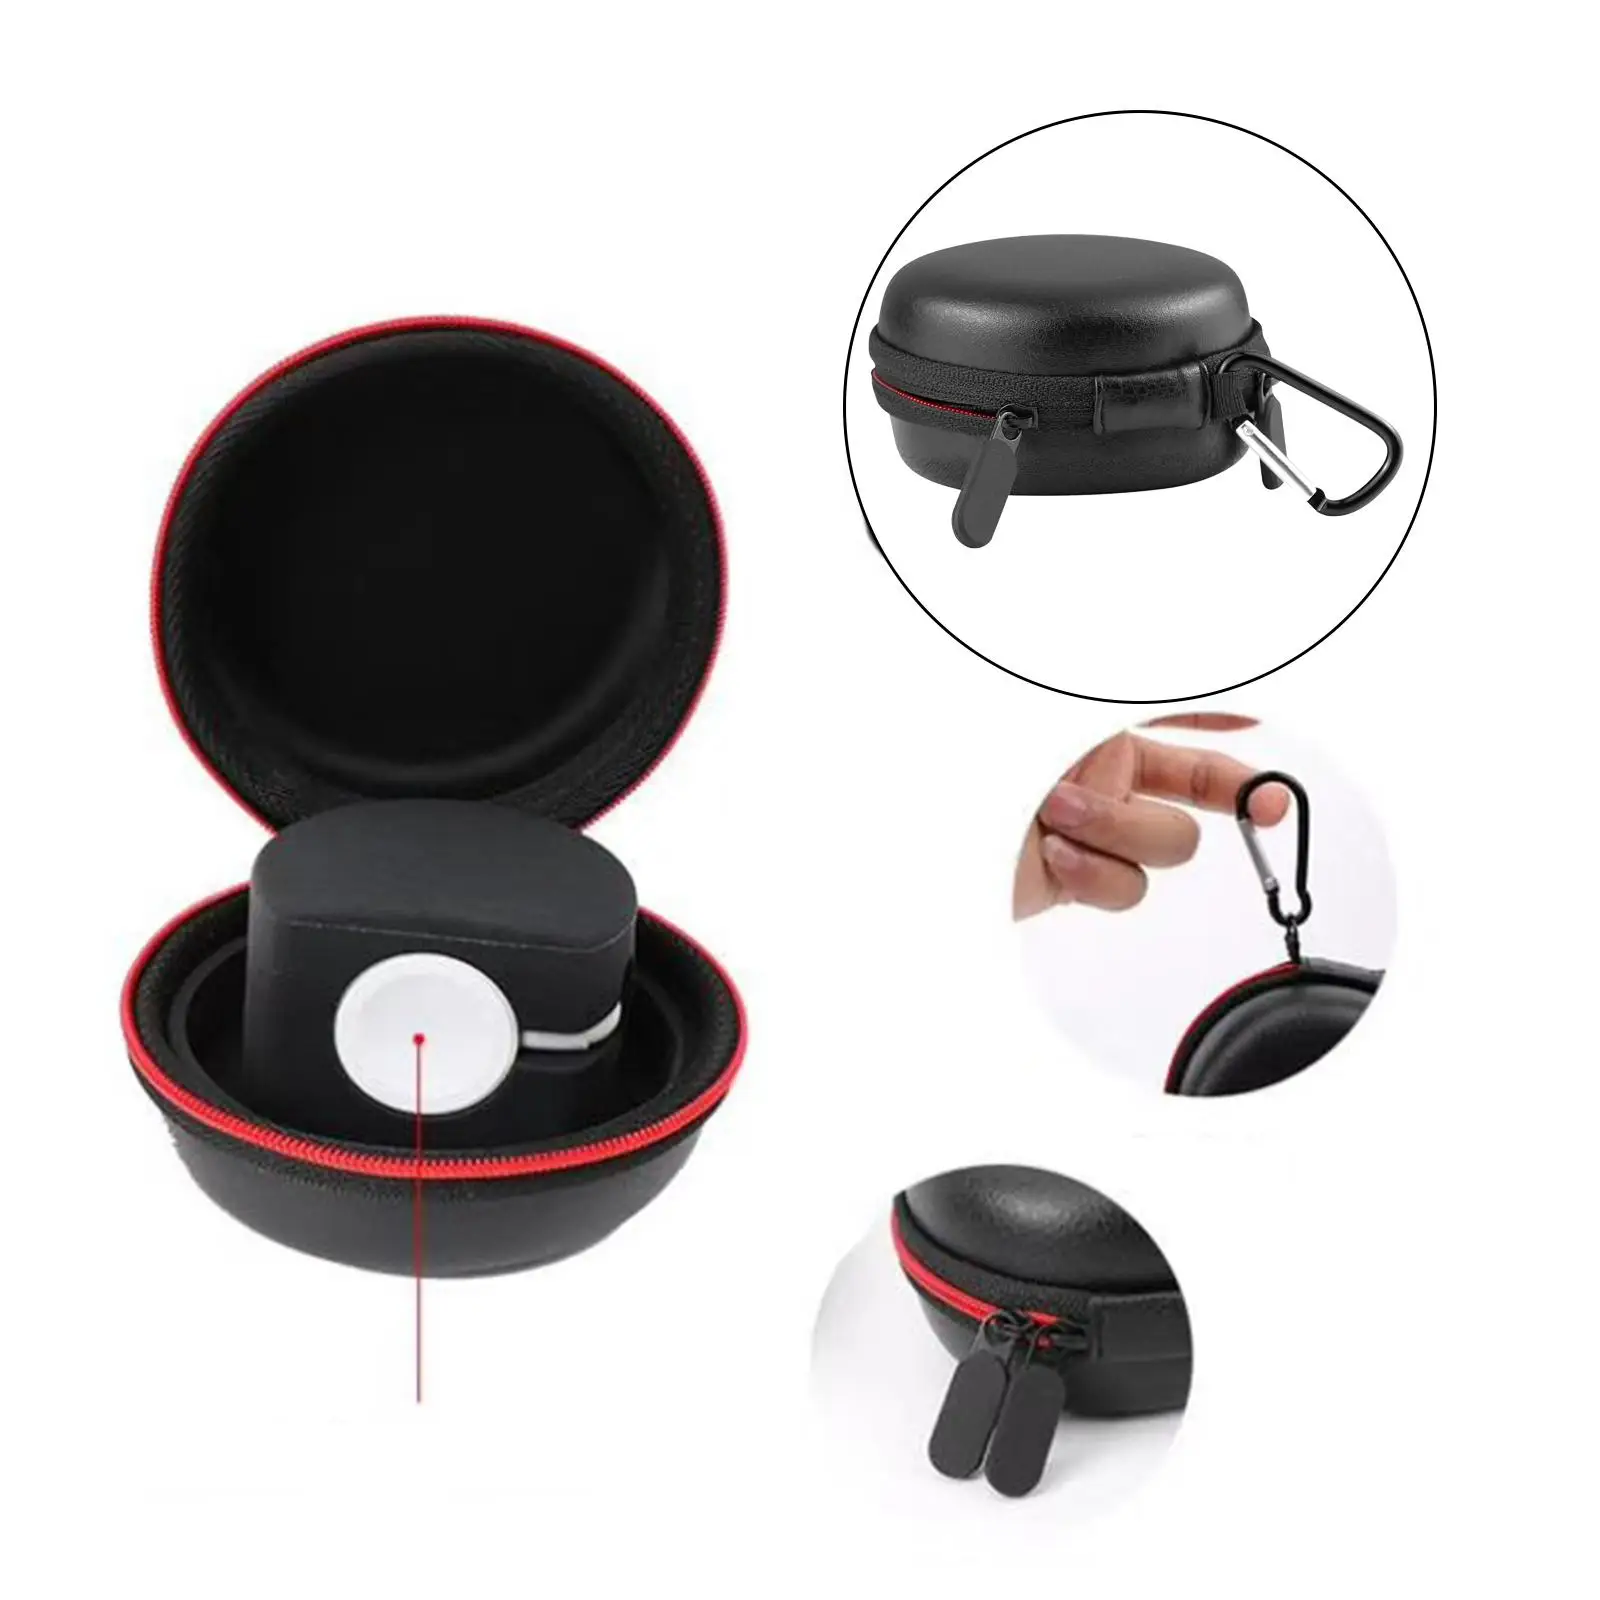 Travel Case for Watch , Portable Carrying Charging Dock Holder for /5/4/3/2/1